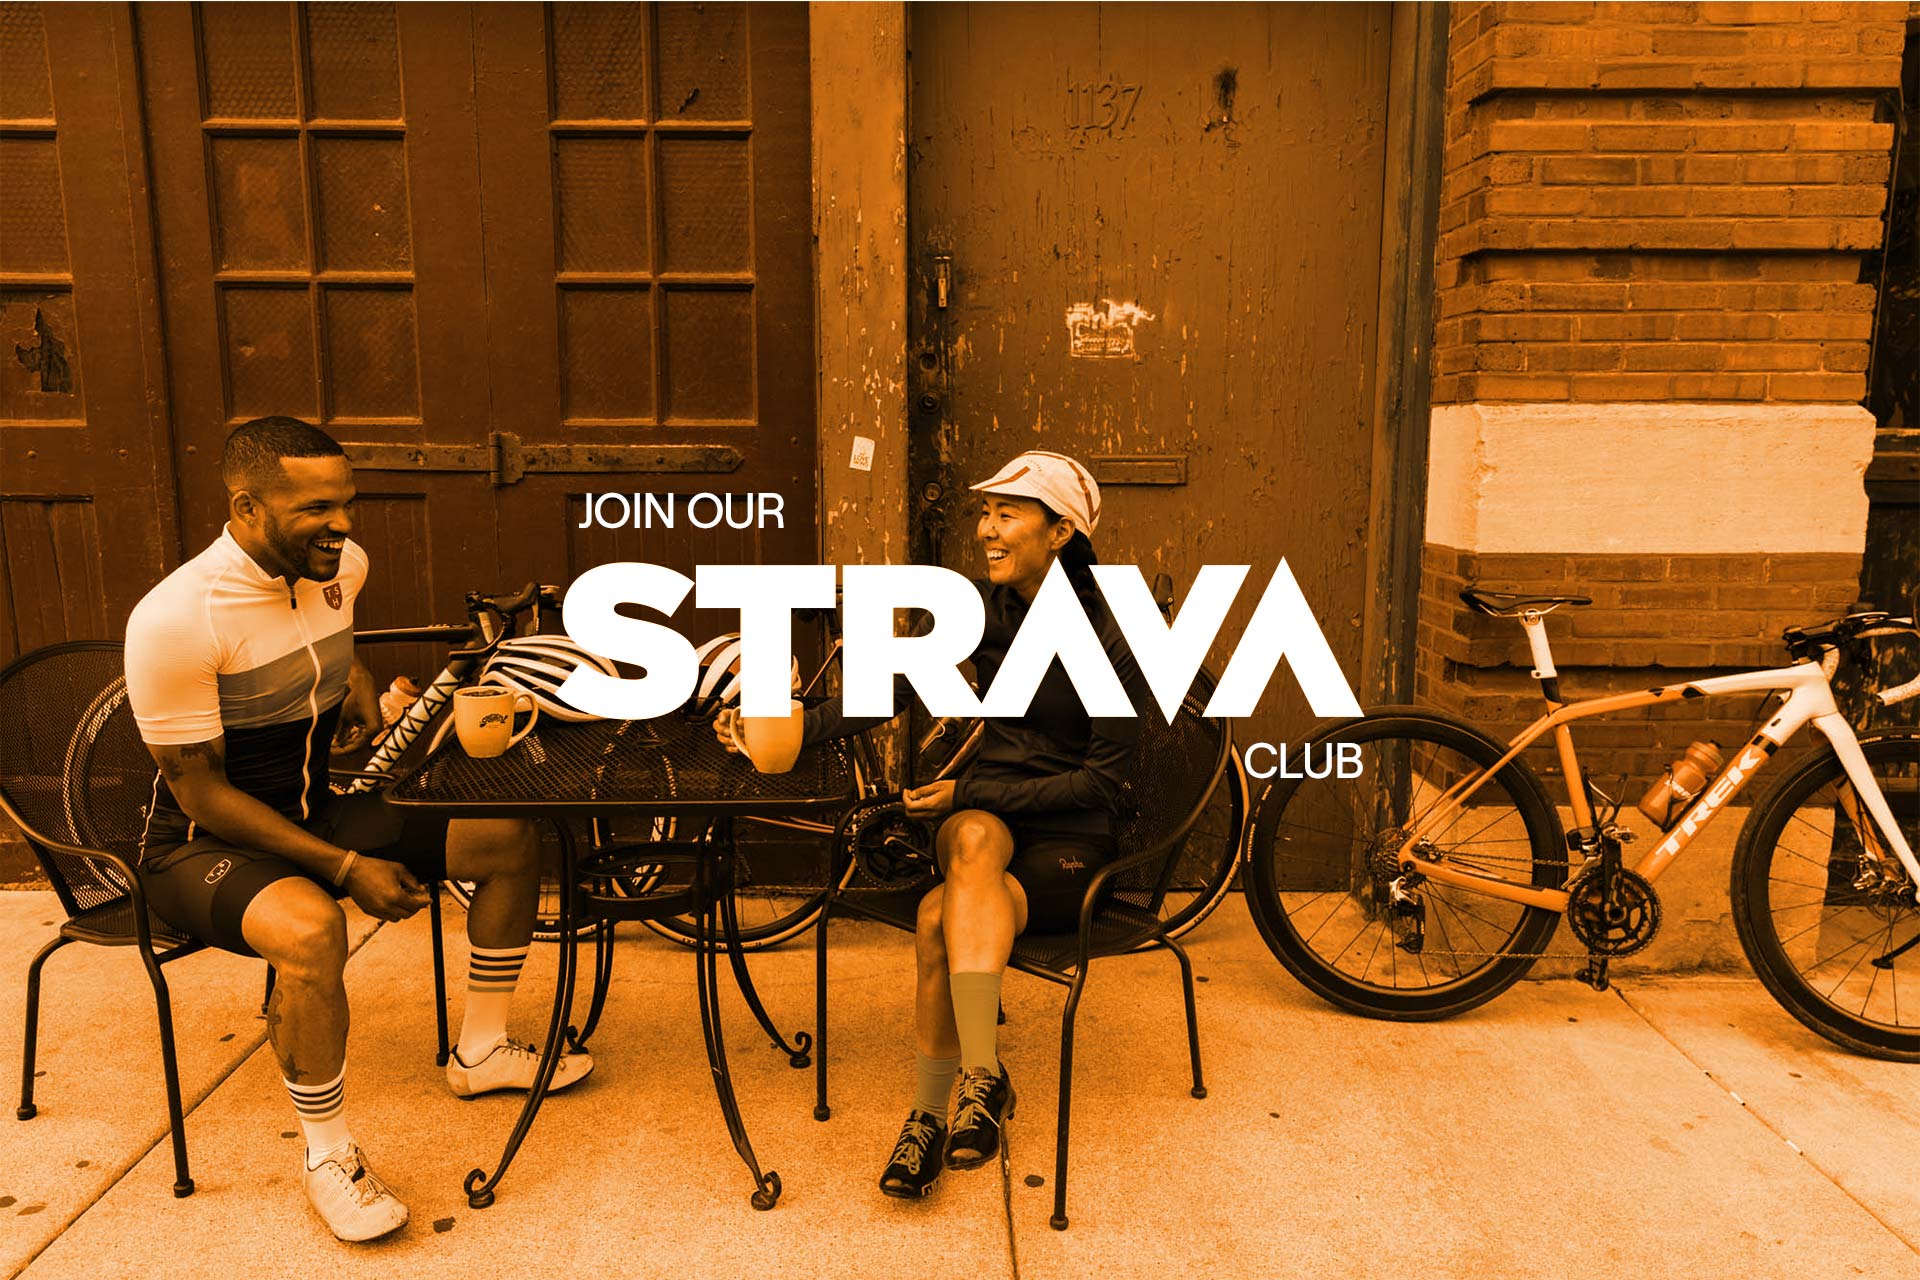 Two cyclists have a coffee at a table, with an orange overlay, with the Strava logo atop